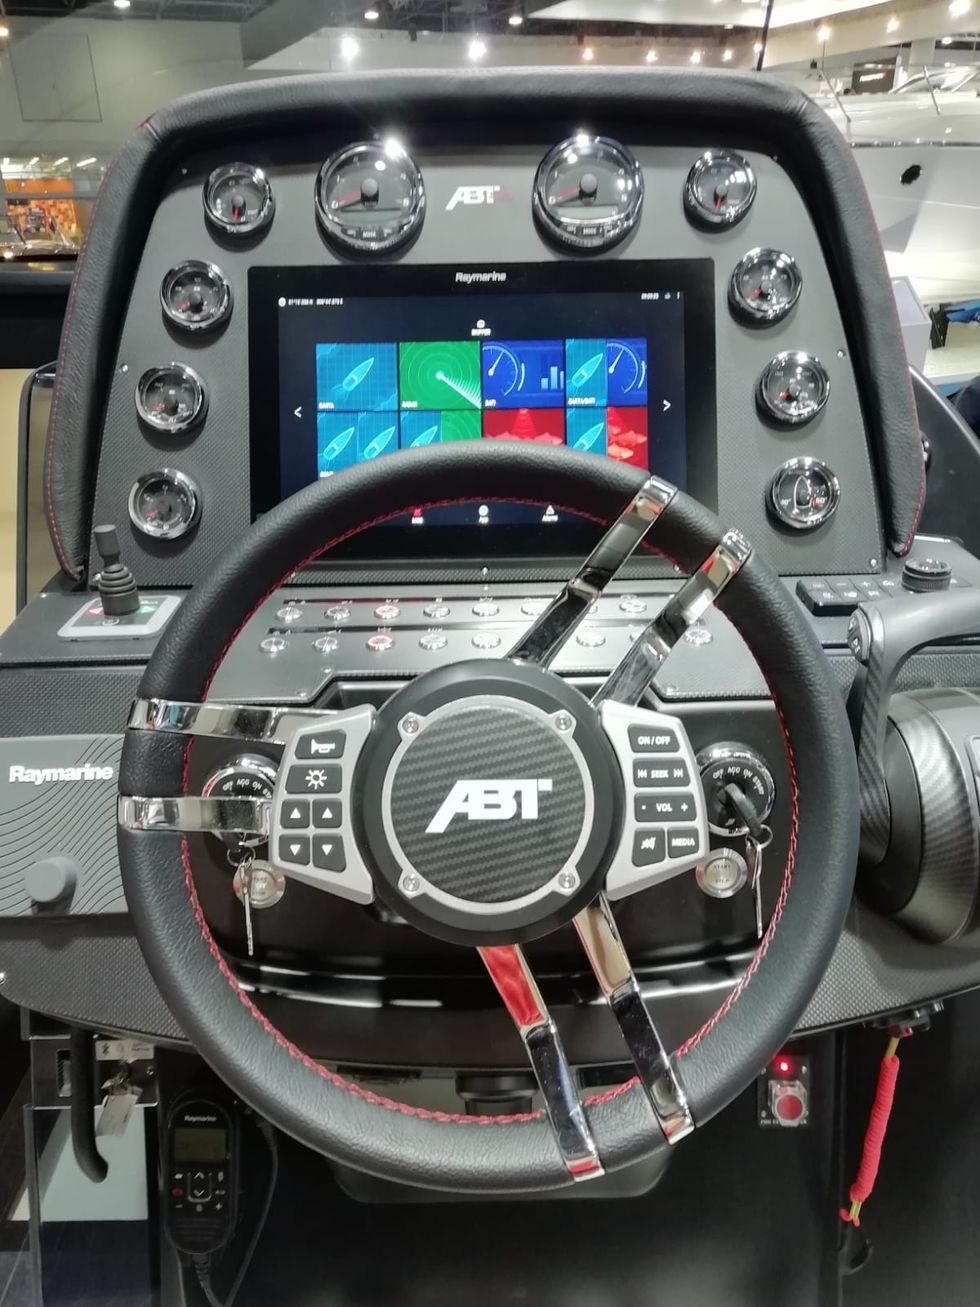 Vehicle, Steering wheel, Steering part, Auto part, Technology, Electronics, Speedboat, Boat, Electronic device, Cockpit, 